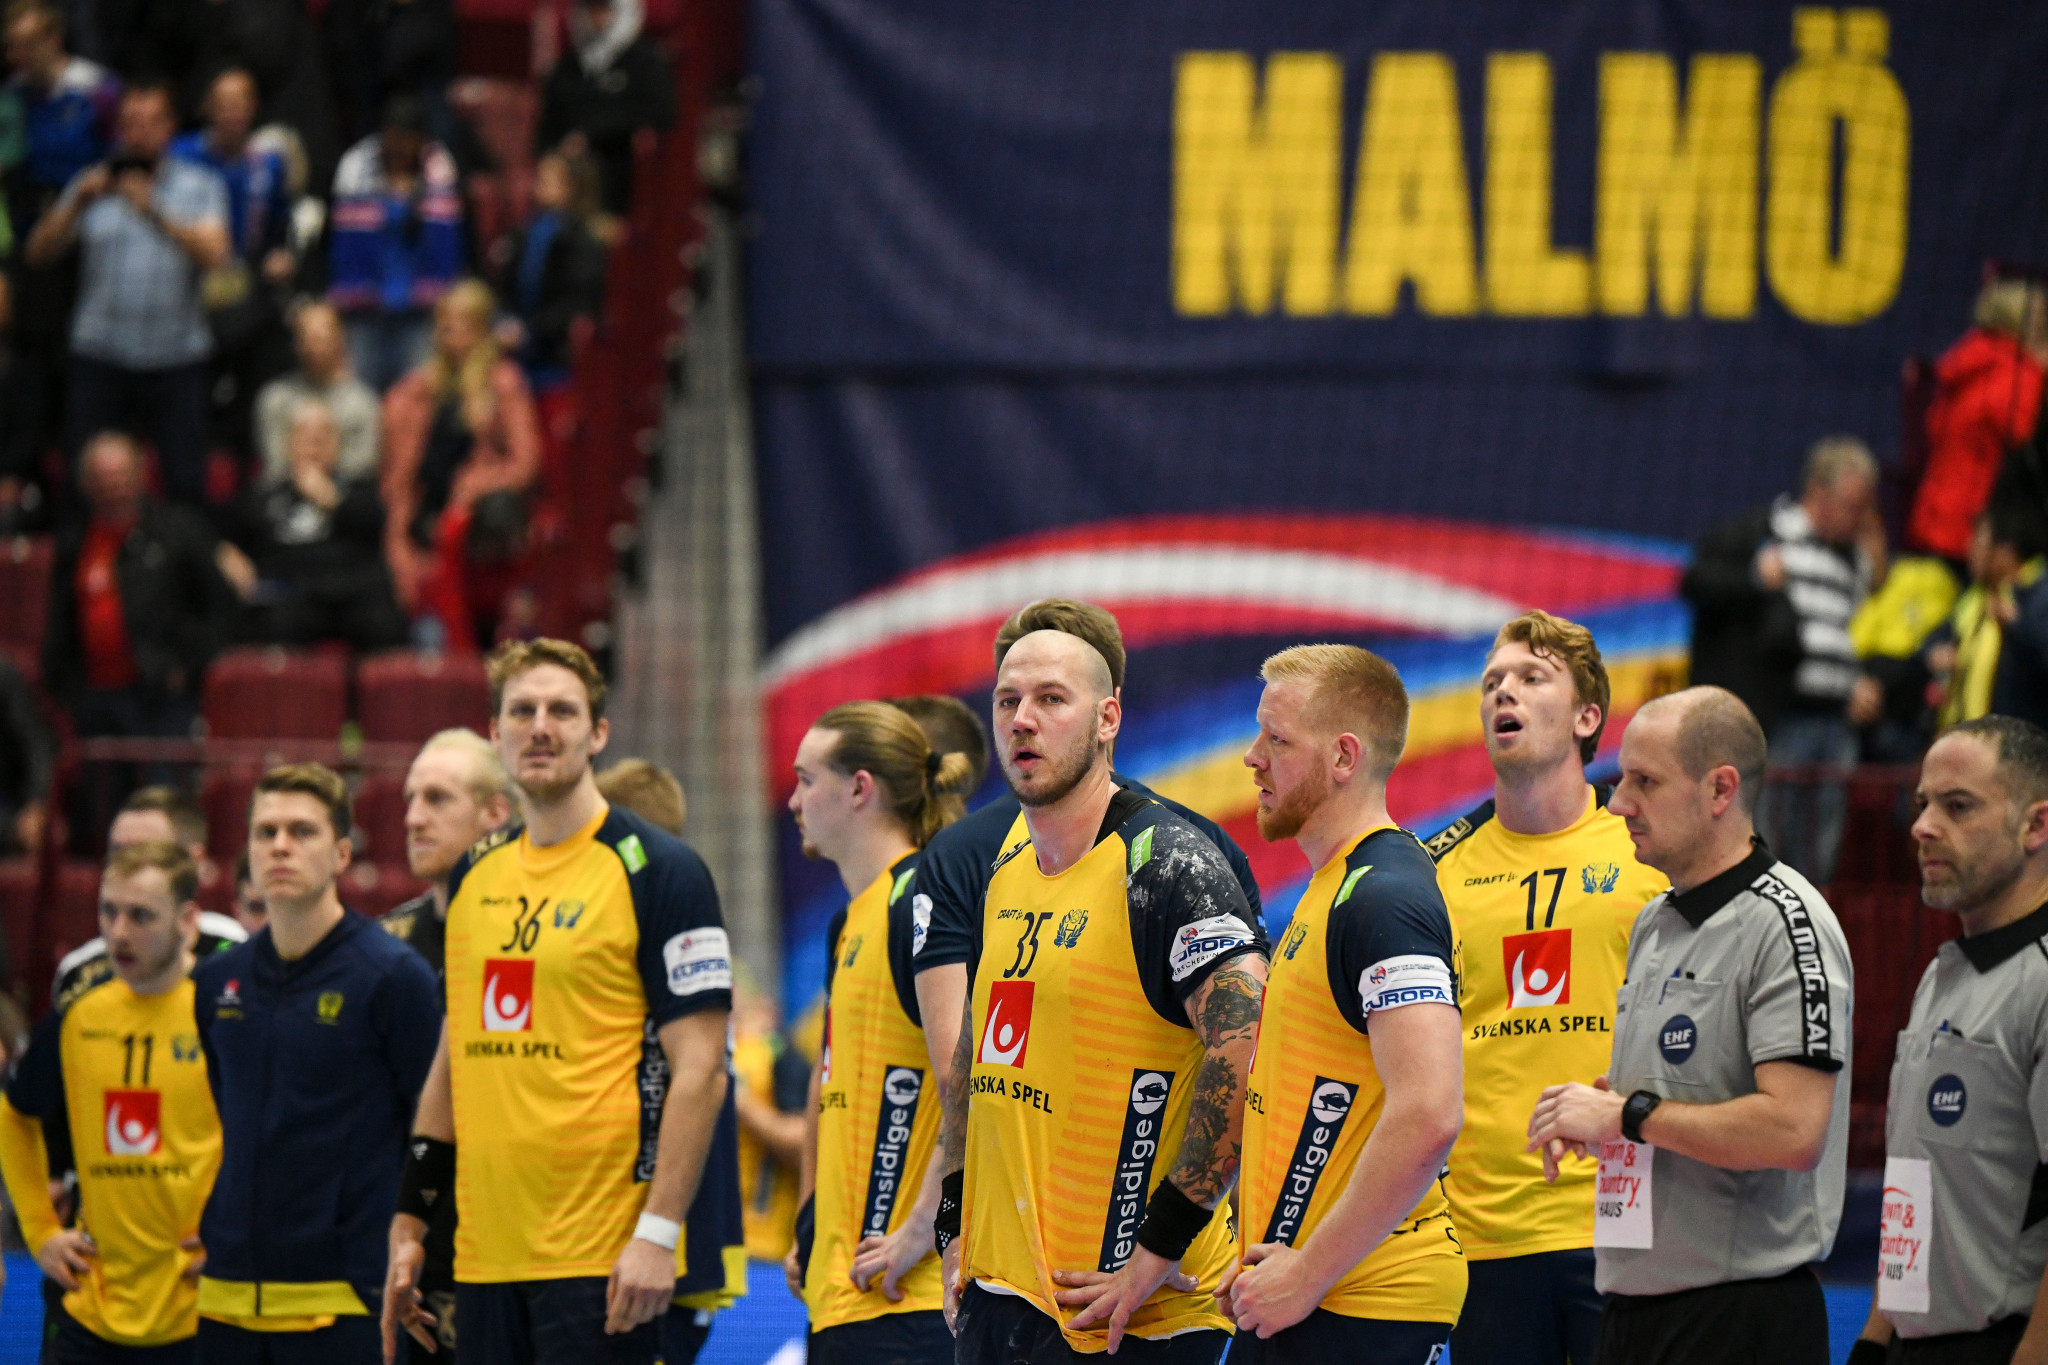 EHF Final4 will now take place in December rather than May due to COVID-19 ©Getty Images